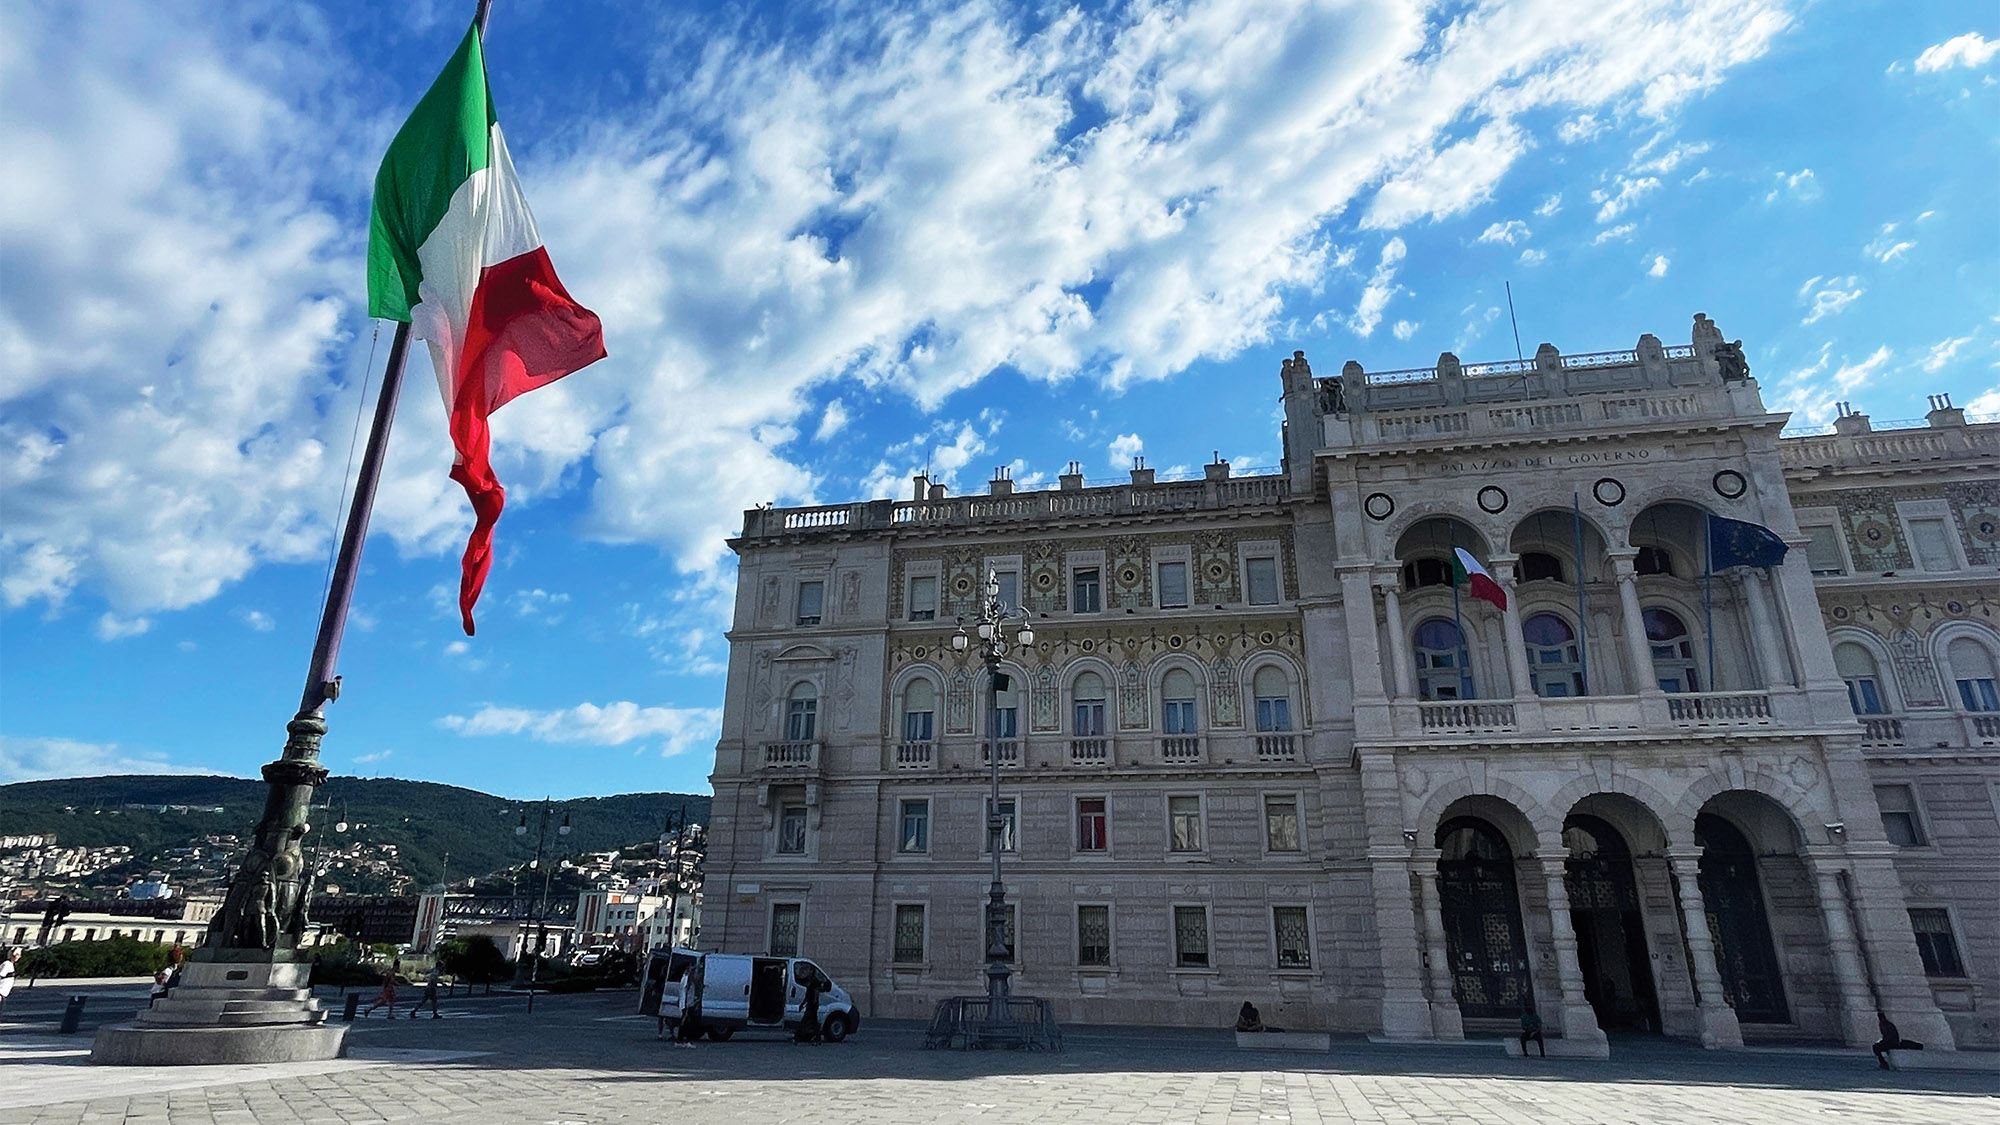 A large Italian flag waves over the governor’s palace in the Piazza Unita d’Italia, Trieste’s gathering place.